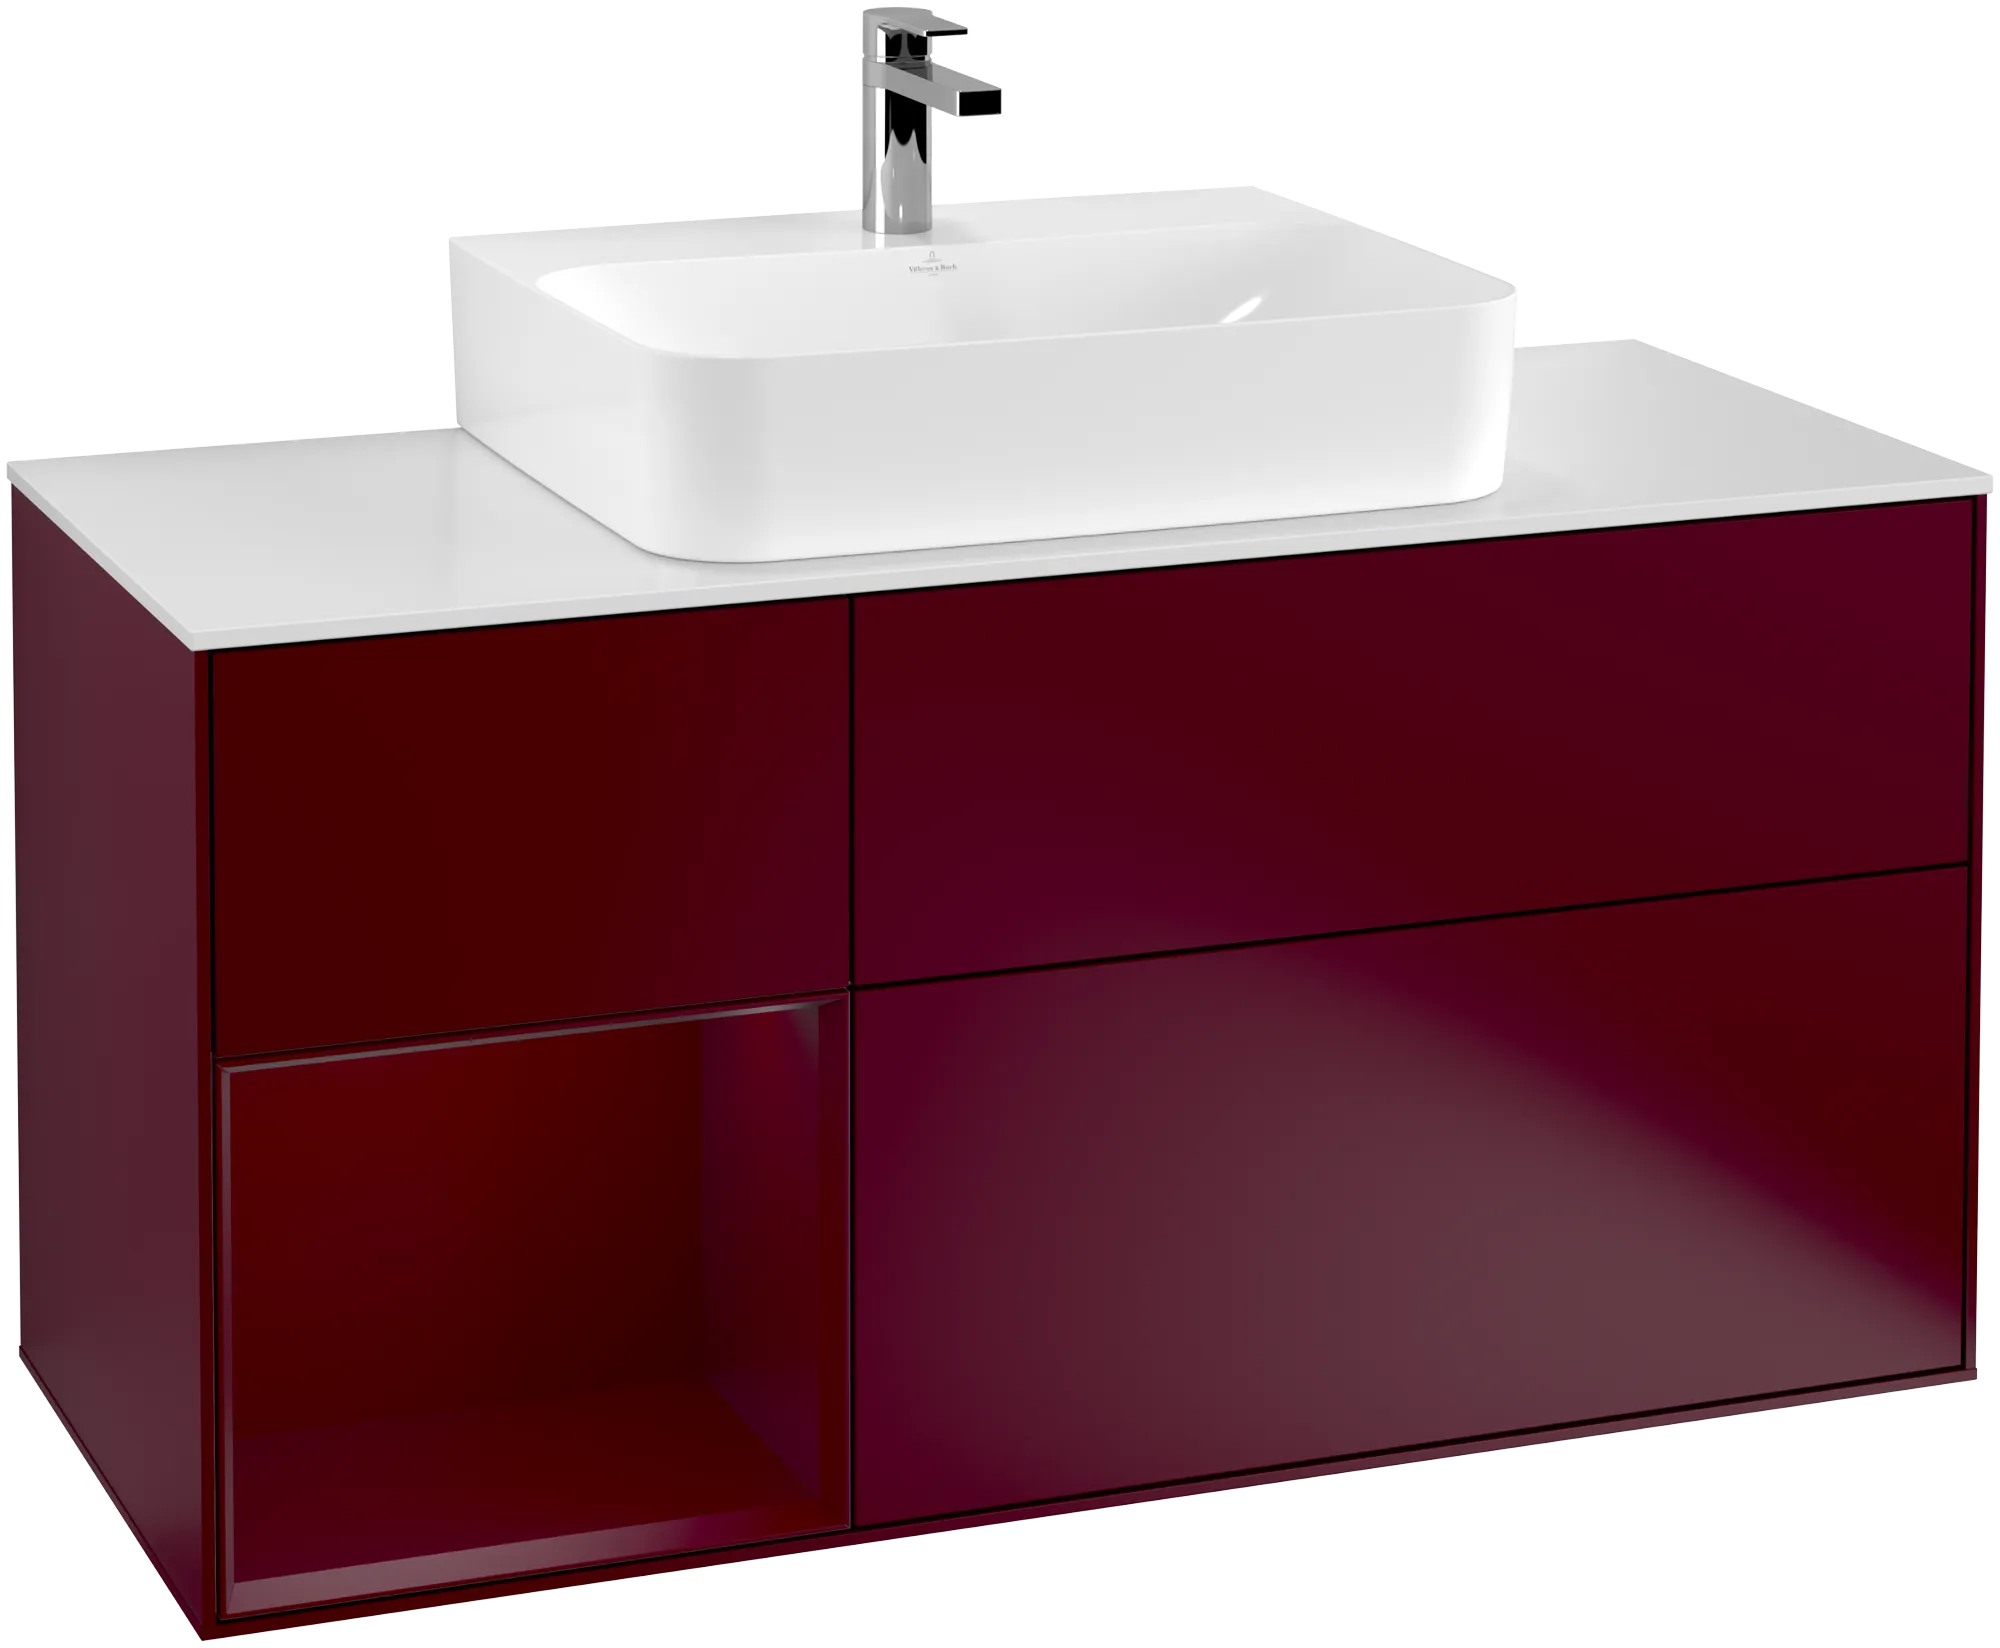 Picture of VILLEROY BOCH Finion Vanity unit, with lighting, 3 pull-out compartments, 1200 x 603 x 501 mm, Peony Matt Lacquer / Peony Matt Lacquer / Glass White Matt #G161HBHB